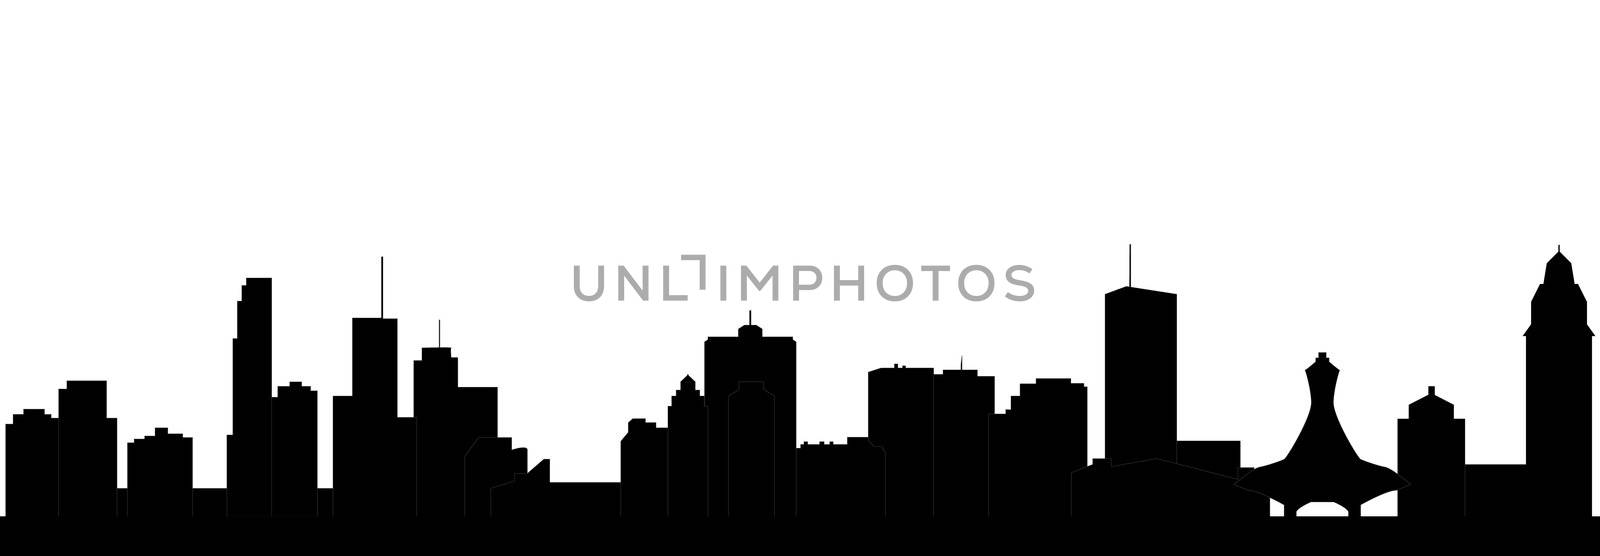 montreal skyline by compuinfoto